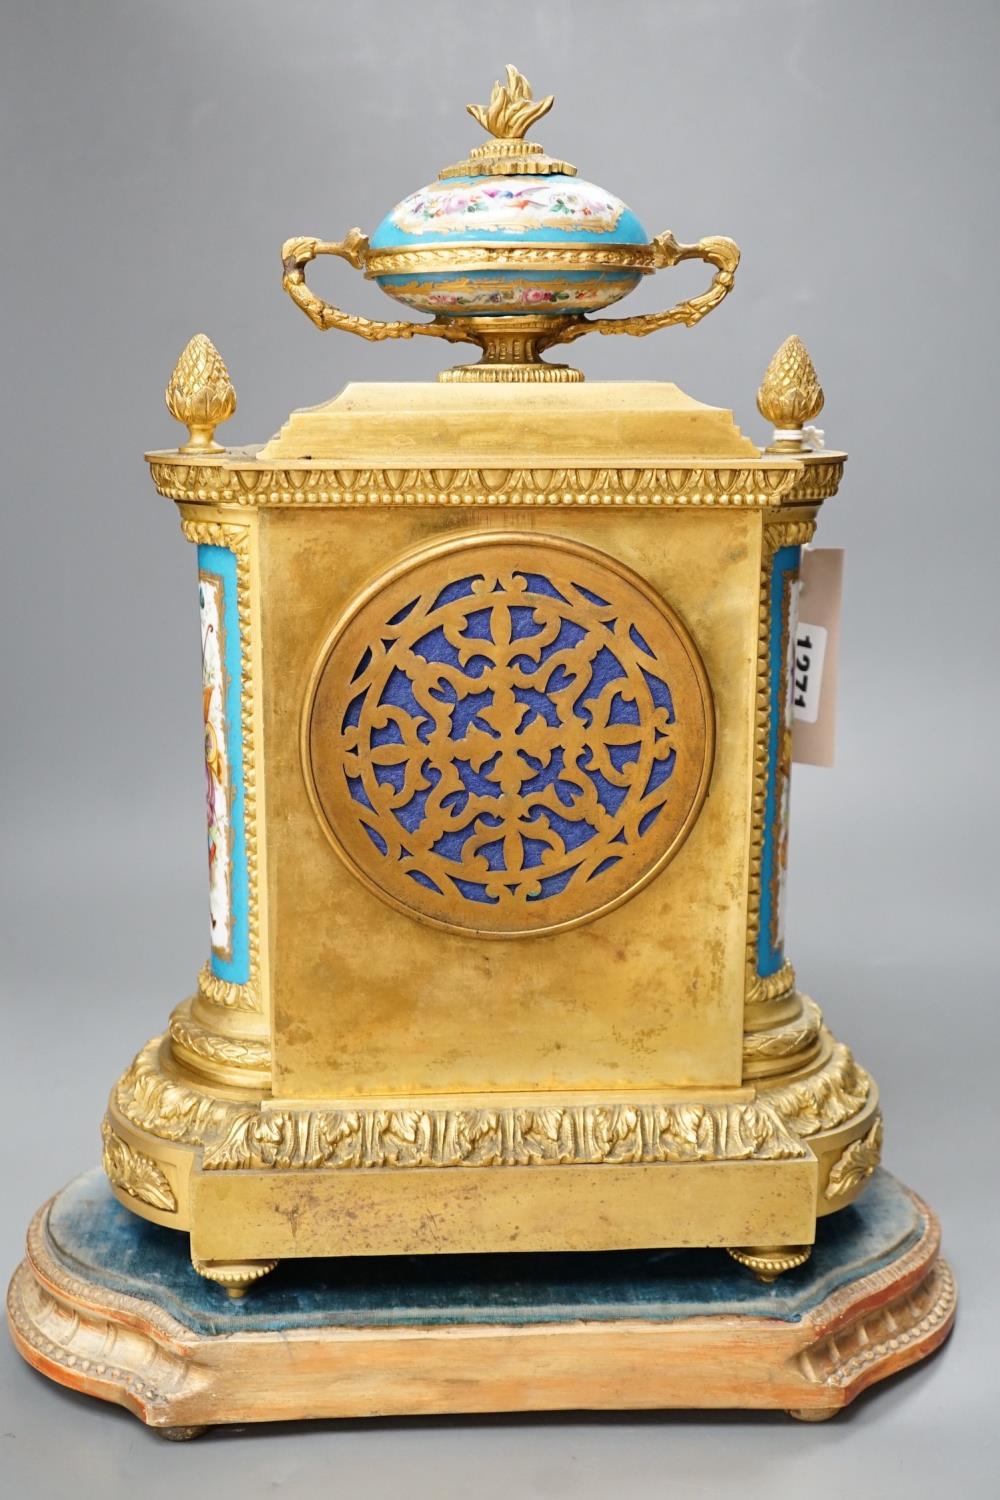 A French ormolu mantel clock, with inset floral decorated porcelain plaques and dial, 40cms high - Image 5 of 7